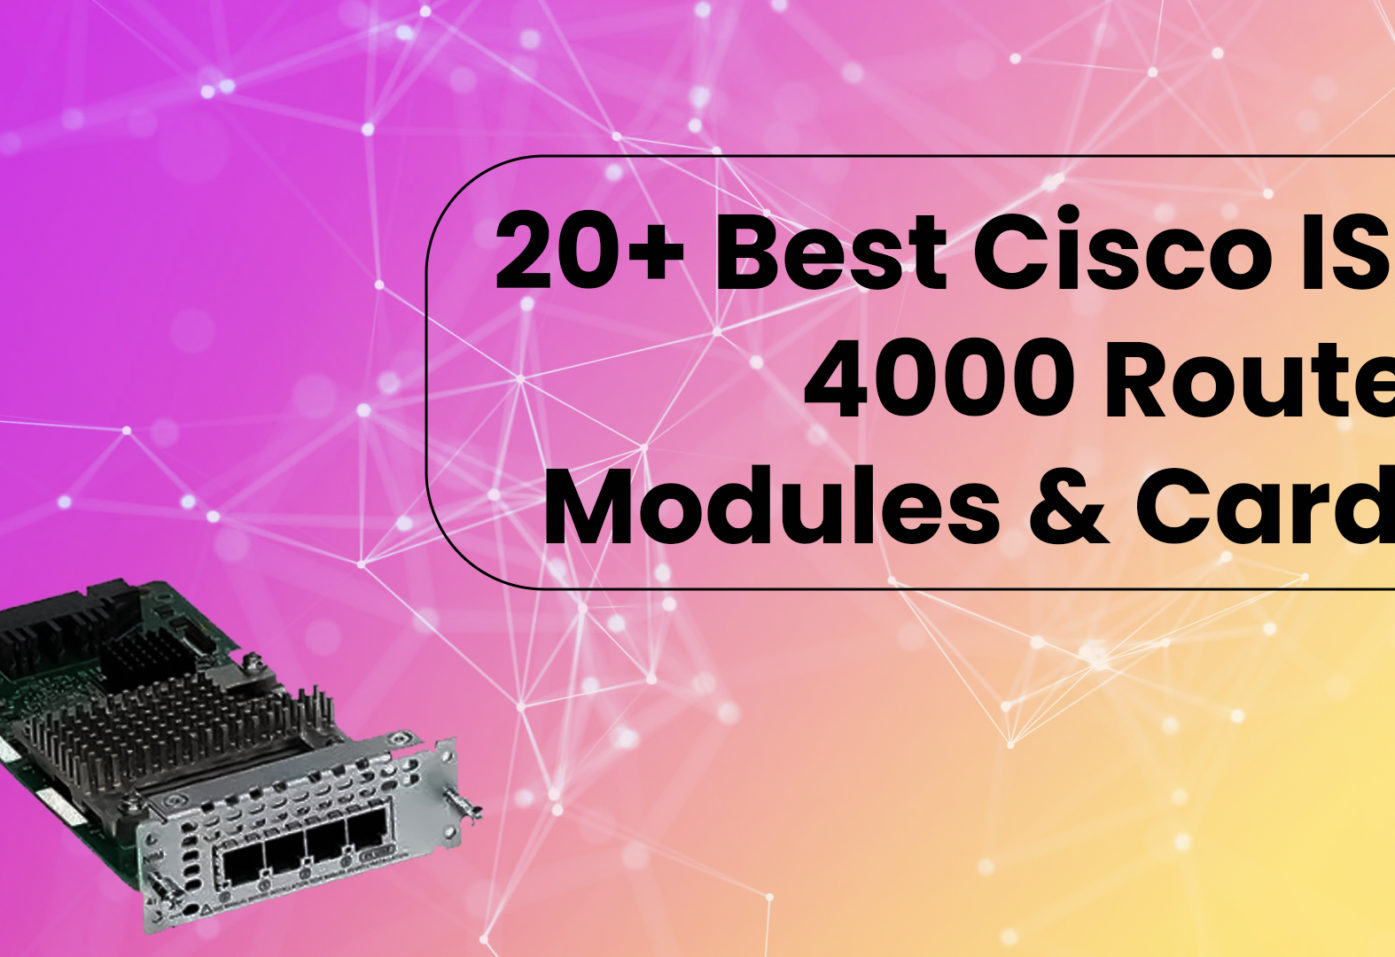 20+ Best Cisco ISR 4000 Router Modules & Cards